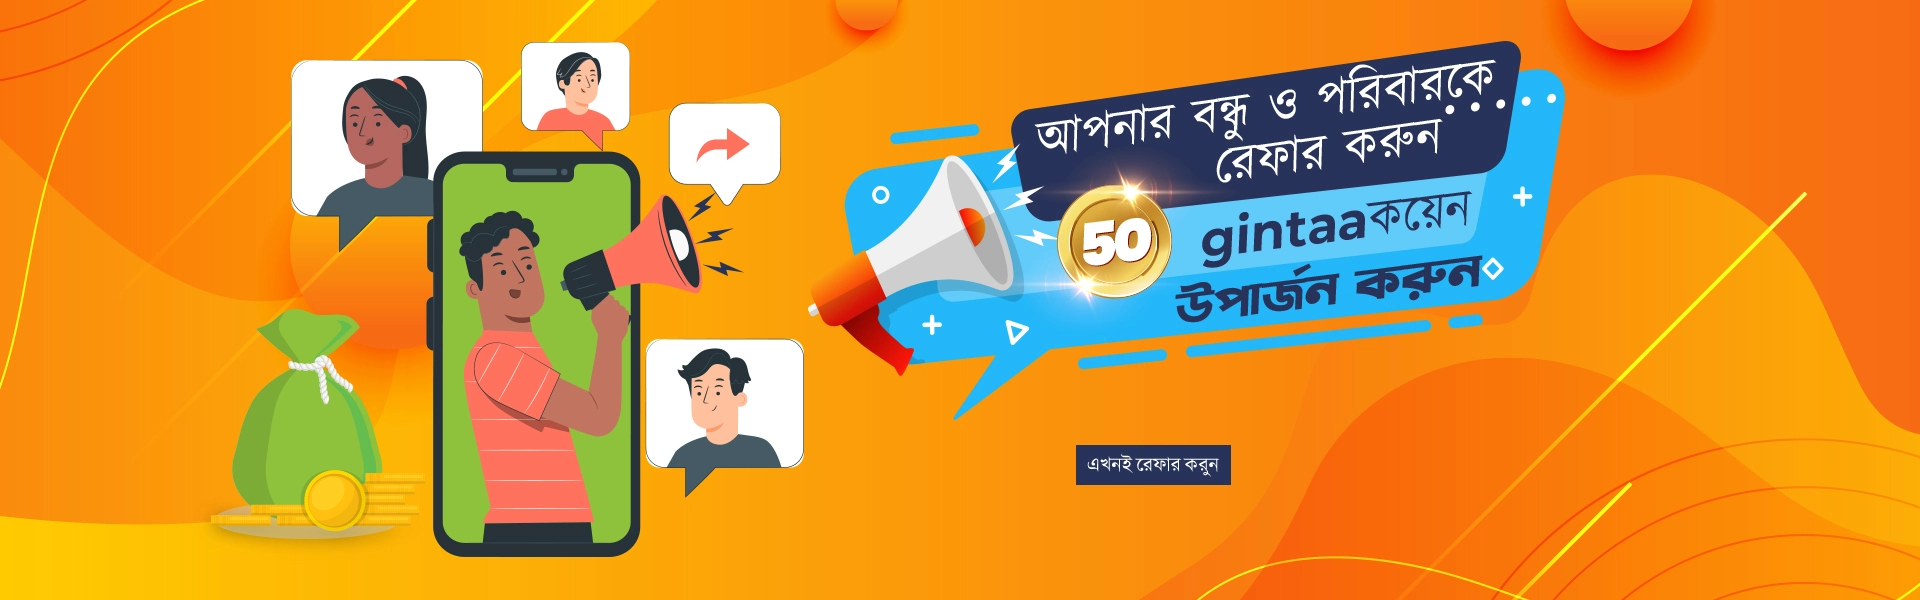 Refer & earn gintaa coins rounded-md